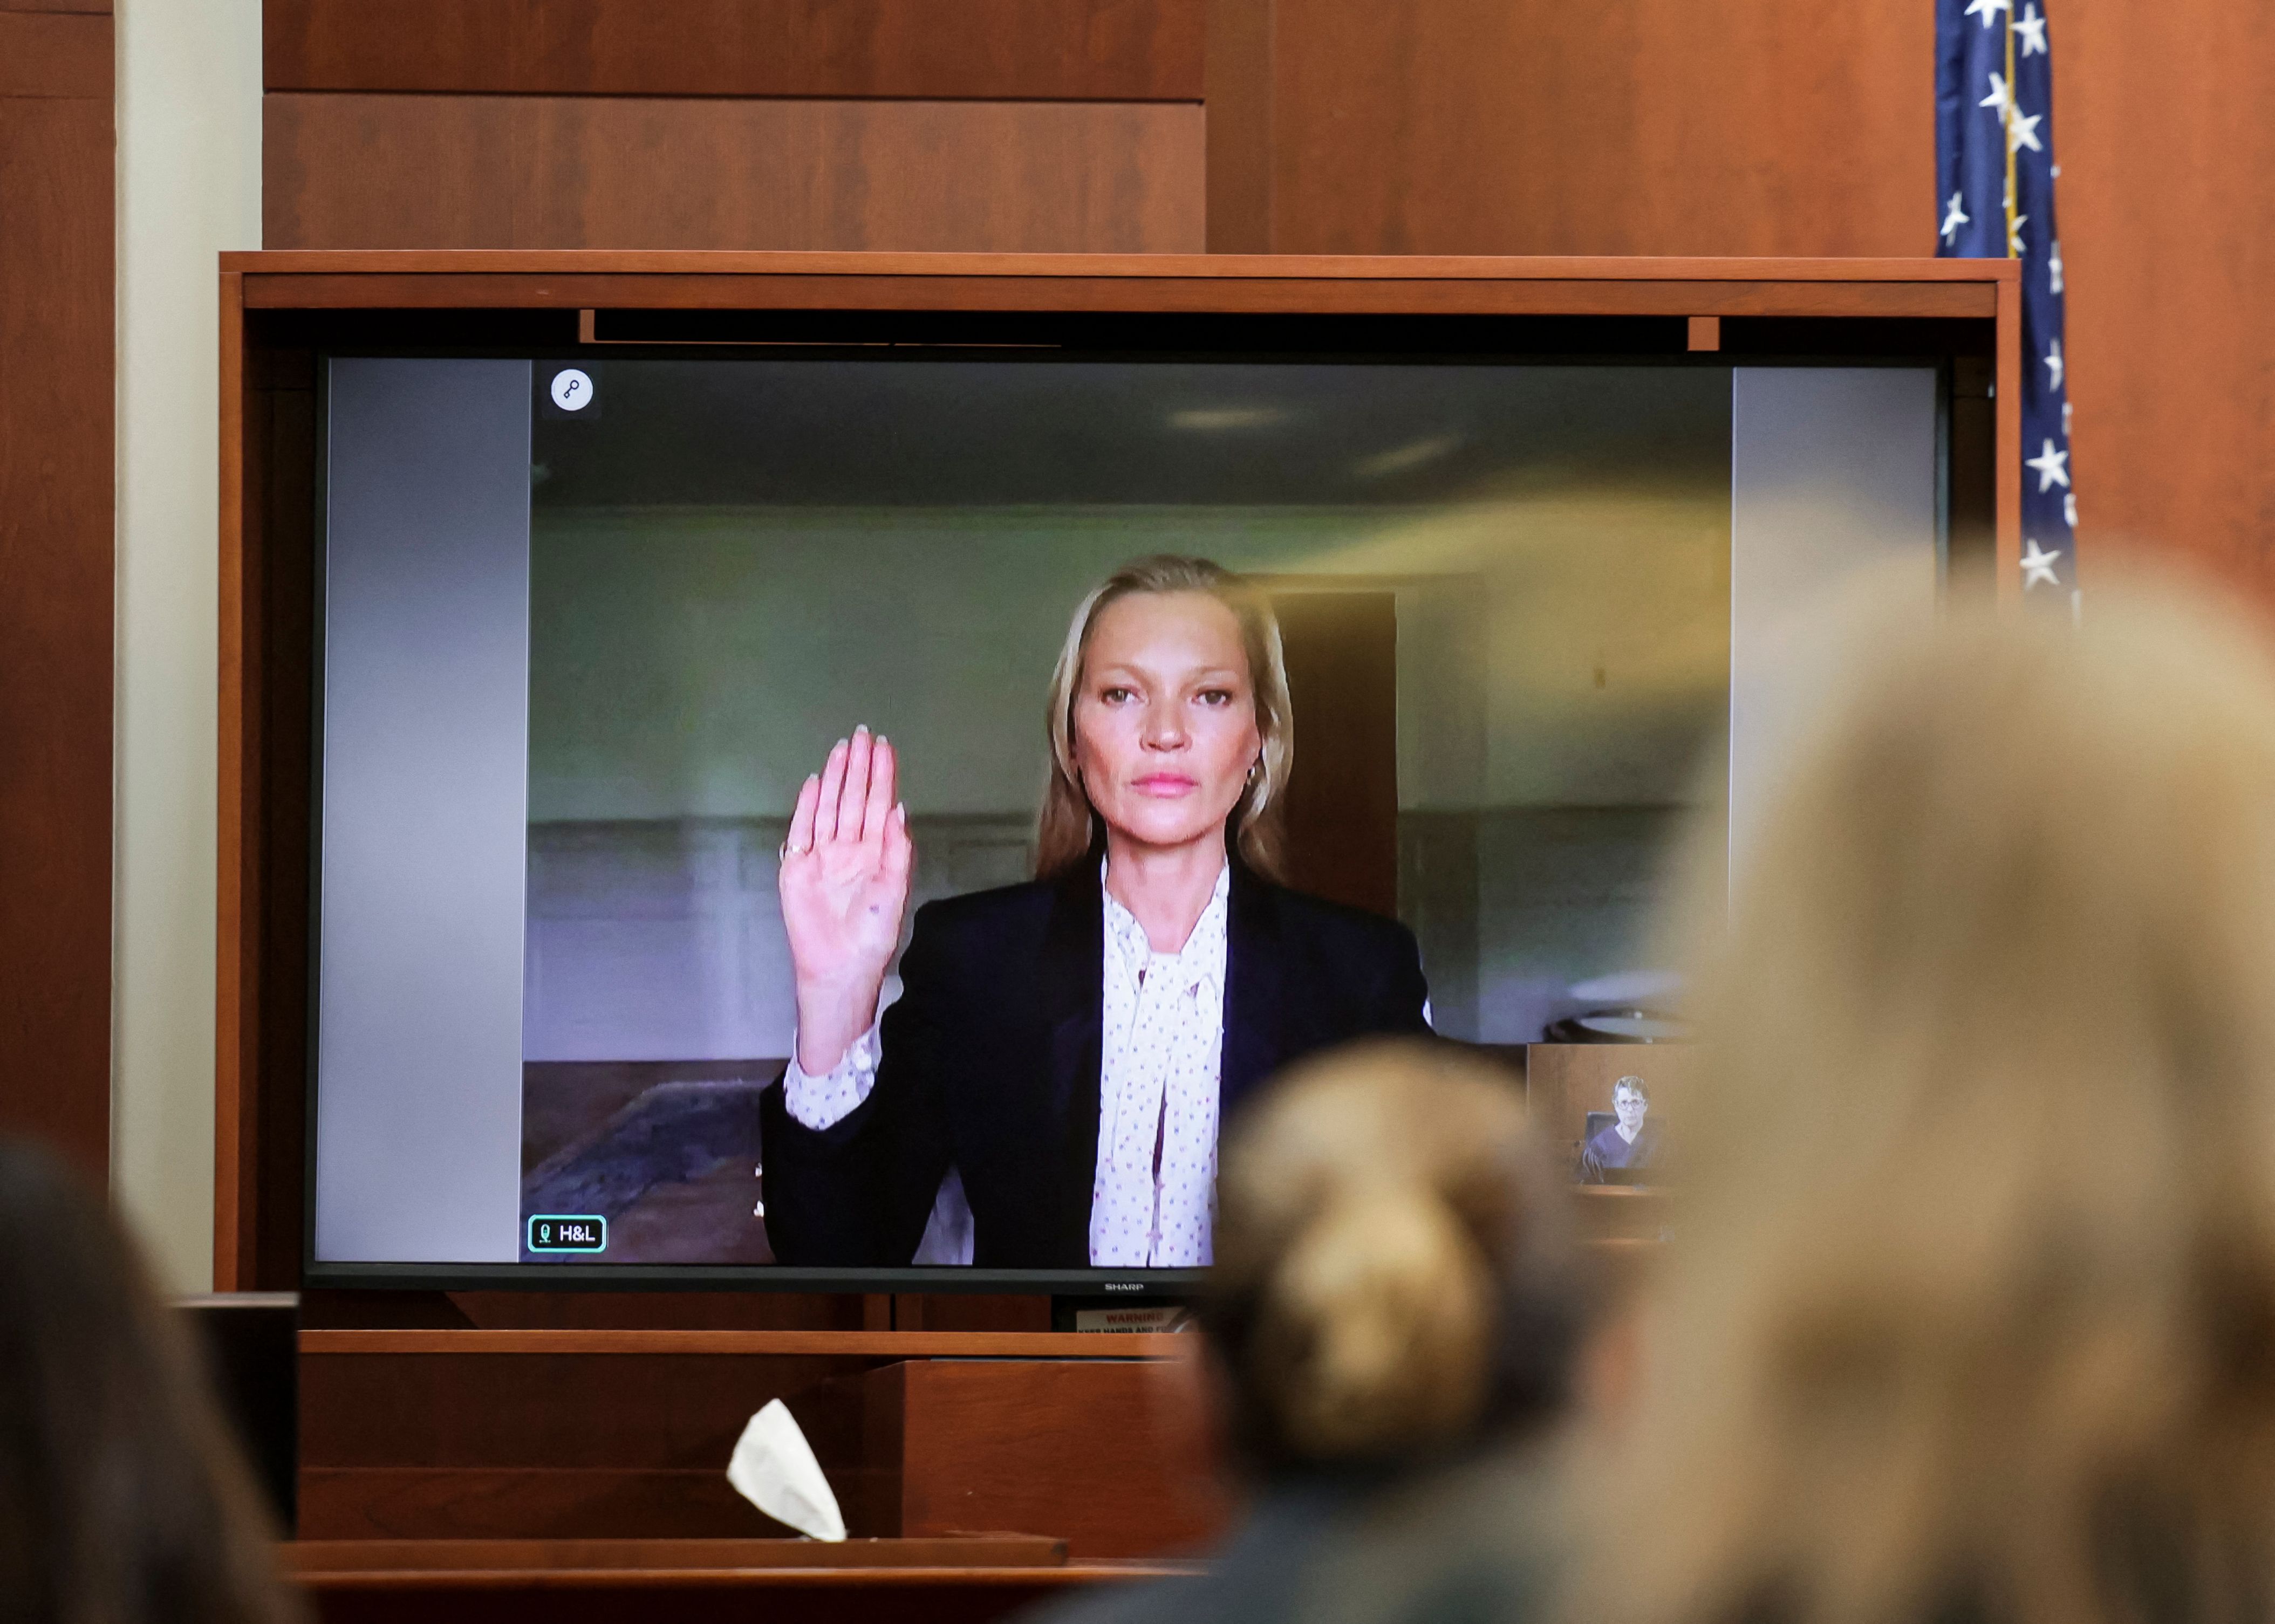 Kate Moss is sworn in via video link at the Fairfax County Circuit Courthouse for Johnny Depp's defamation trial